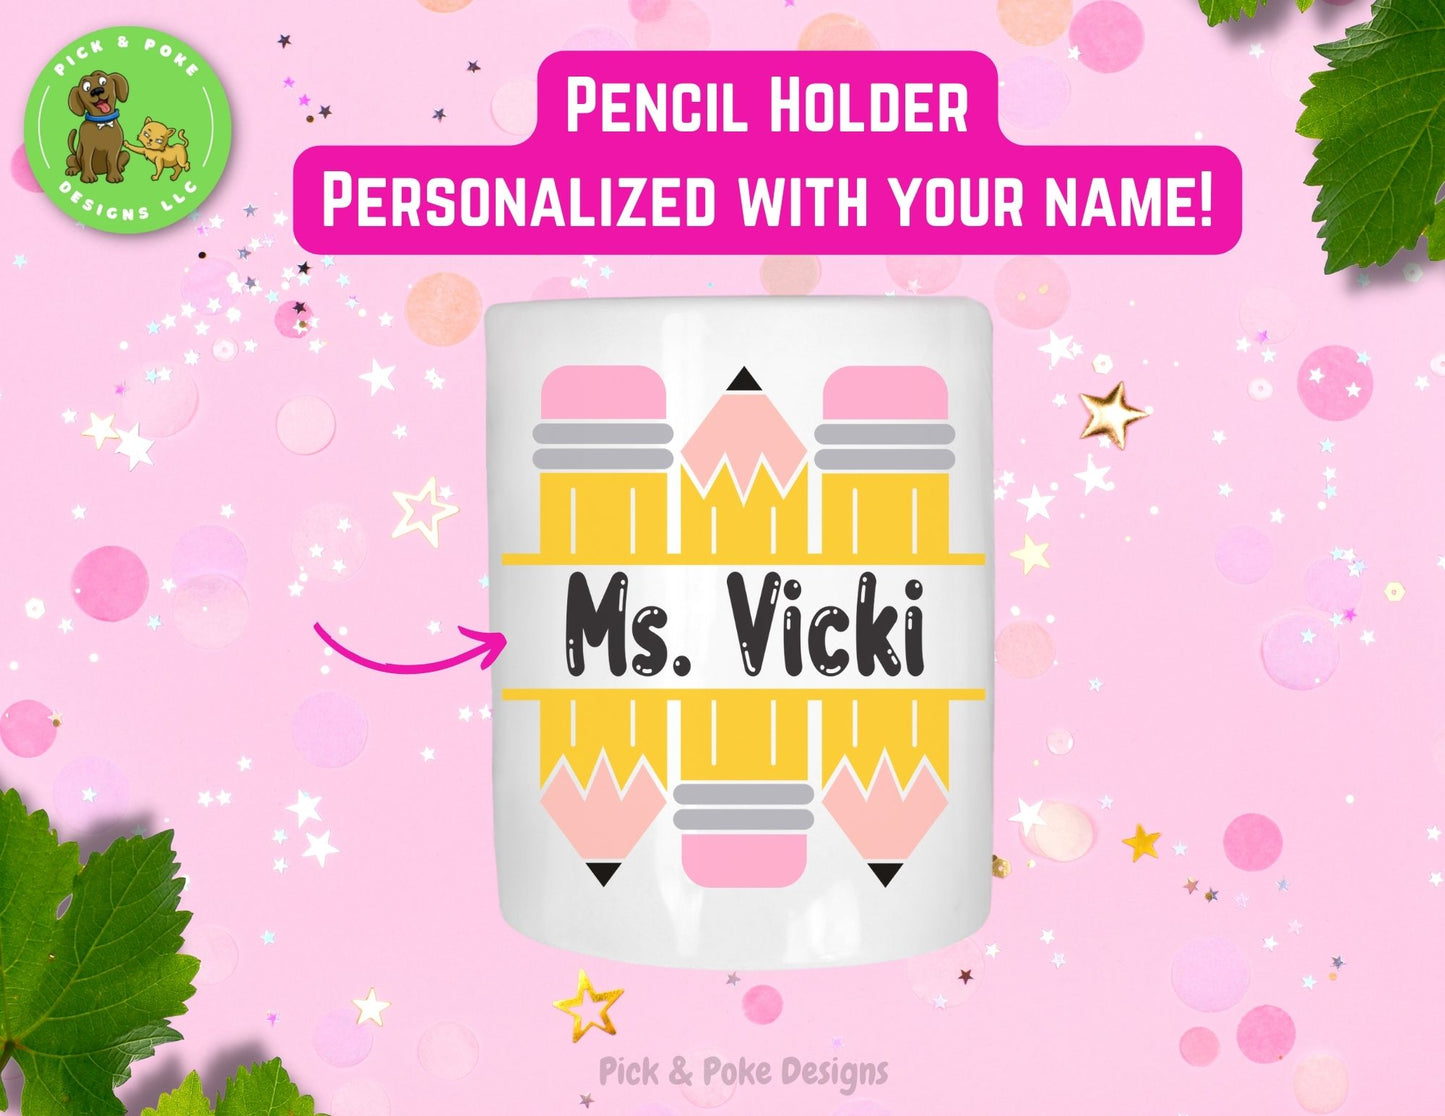 Customized pencil holder has your name printed using a bubble style font